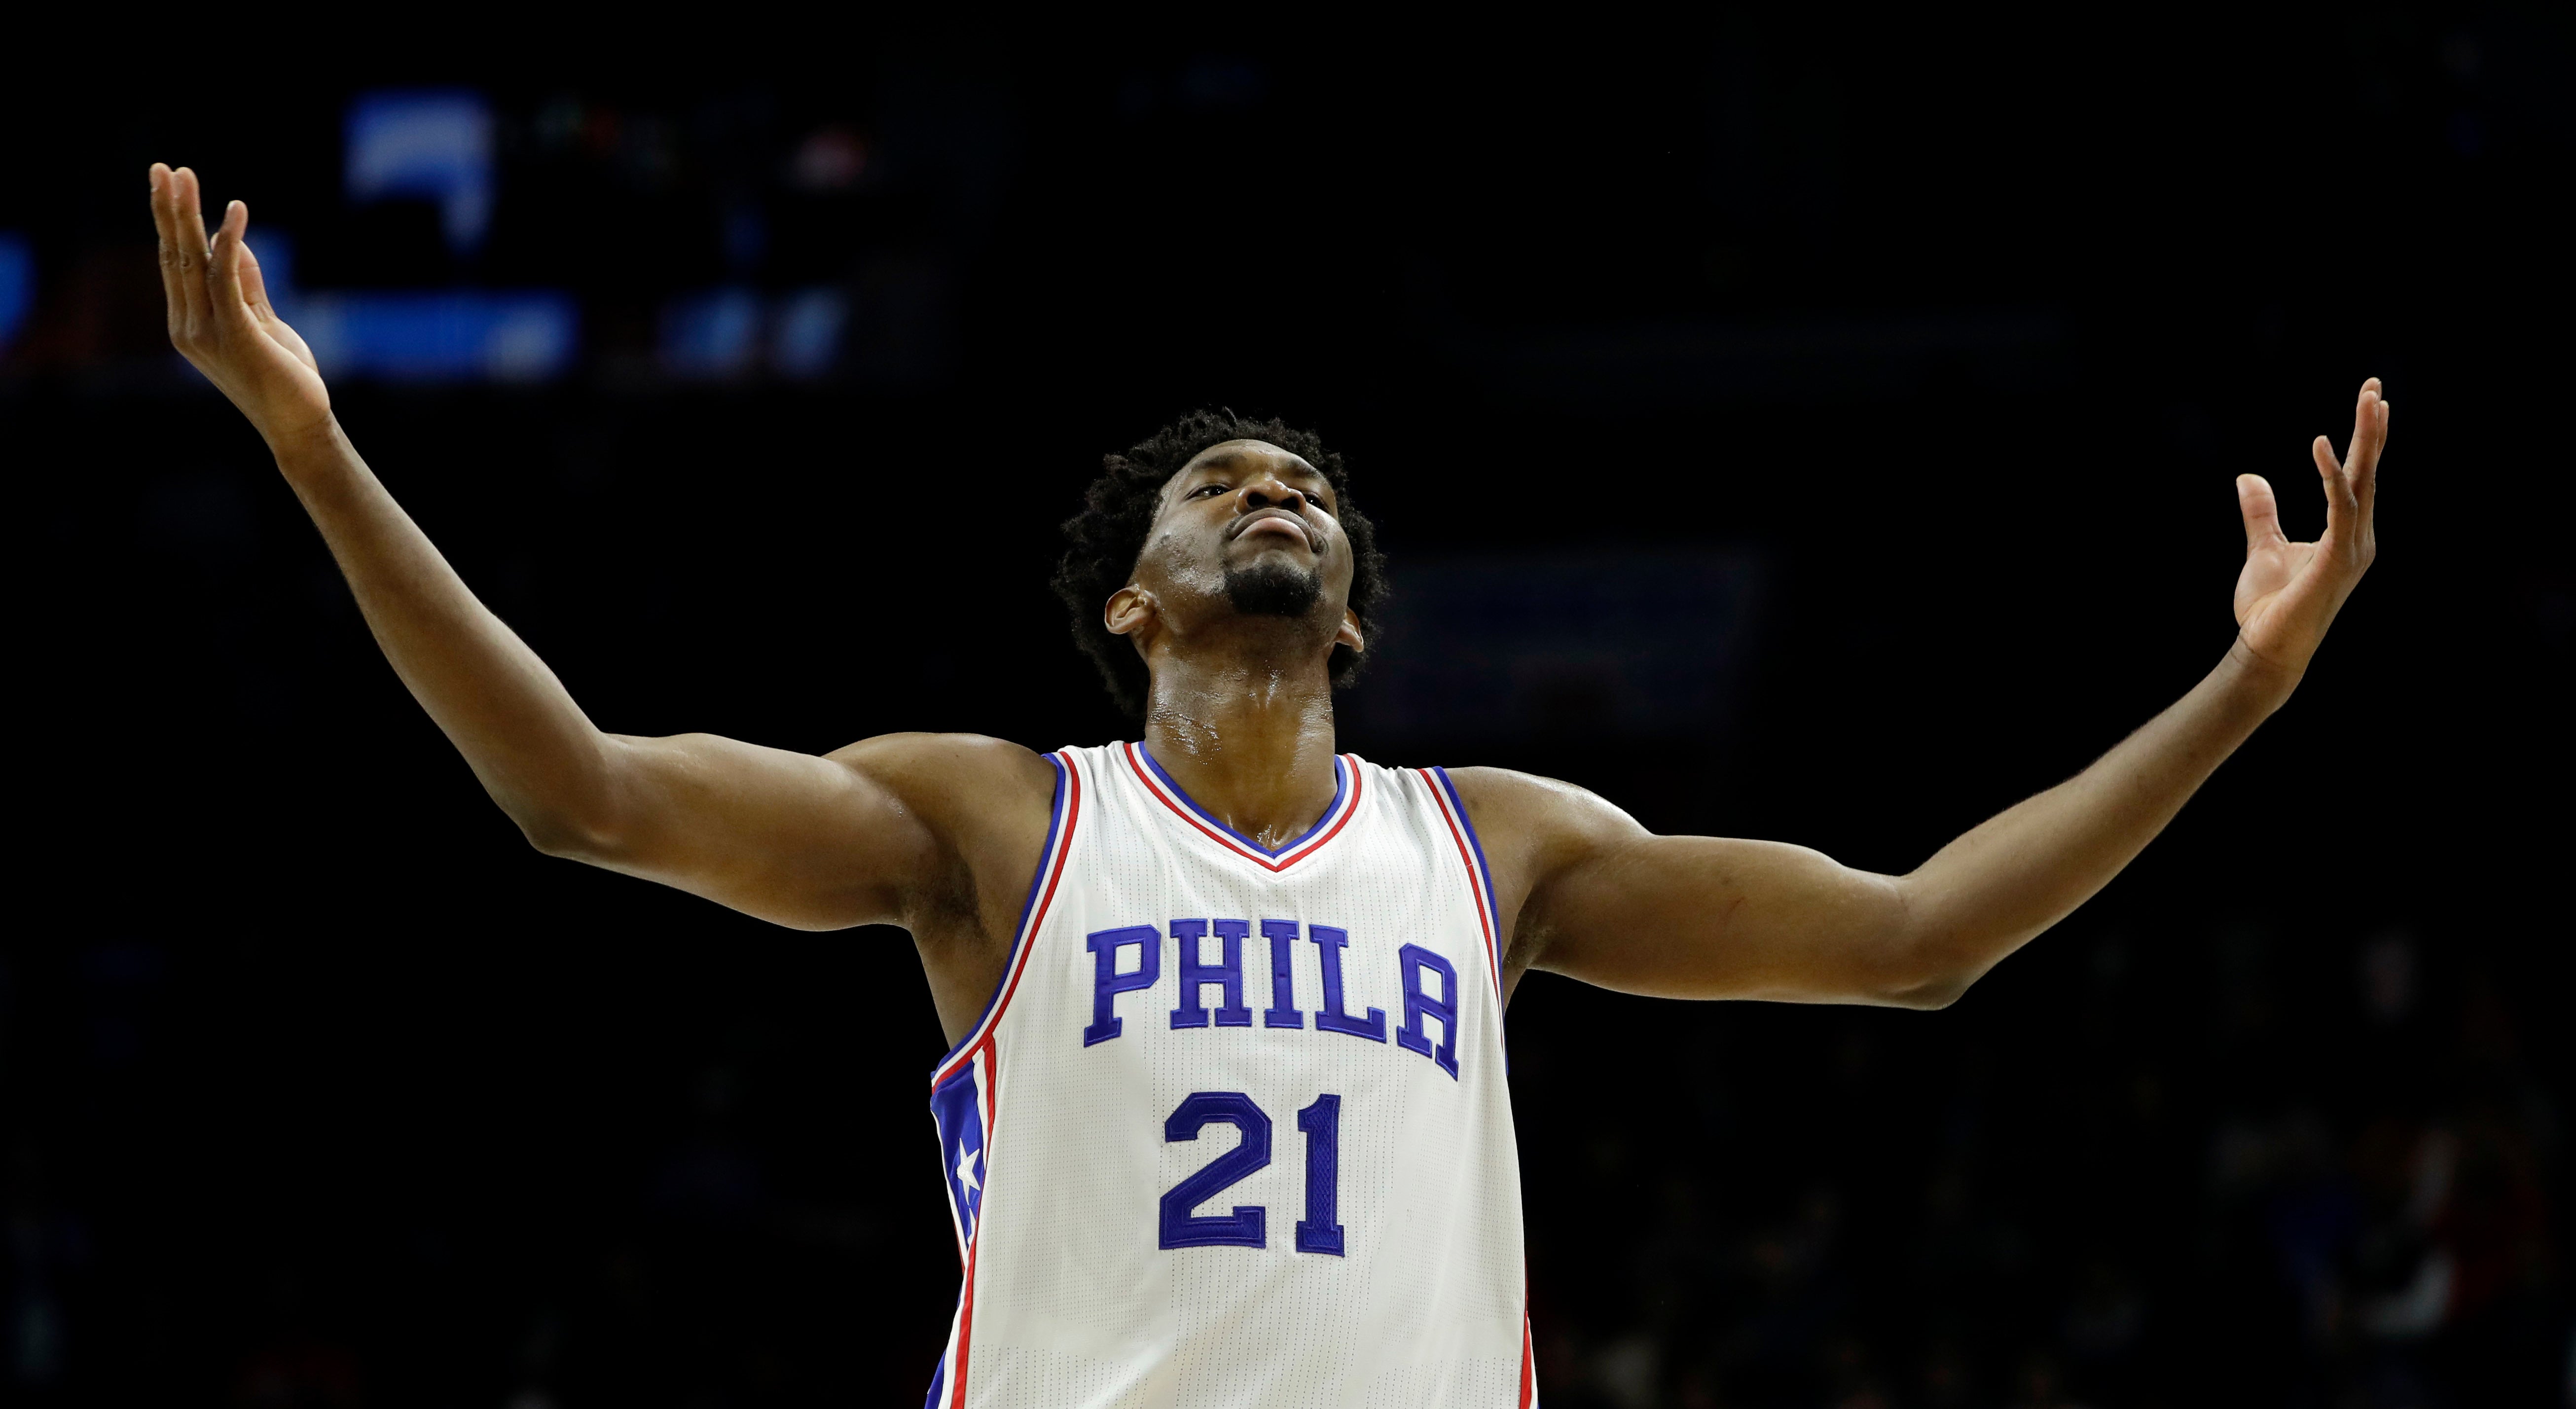 Why do the Sixers’ rest Joel Embiid when he’s not injured? WHYY